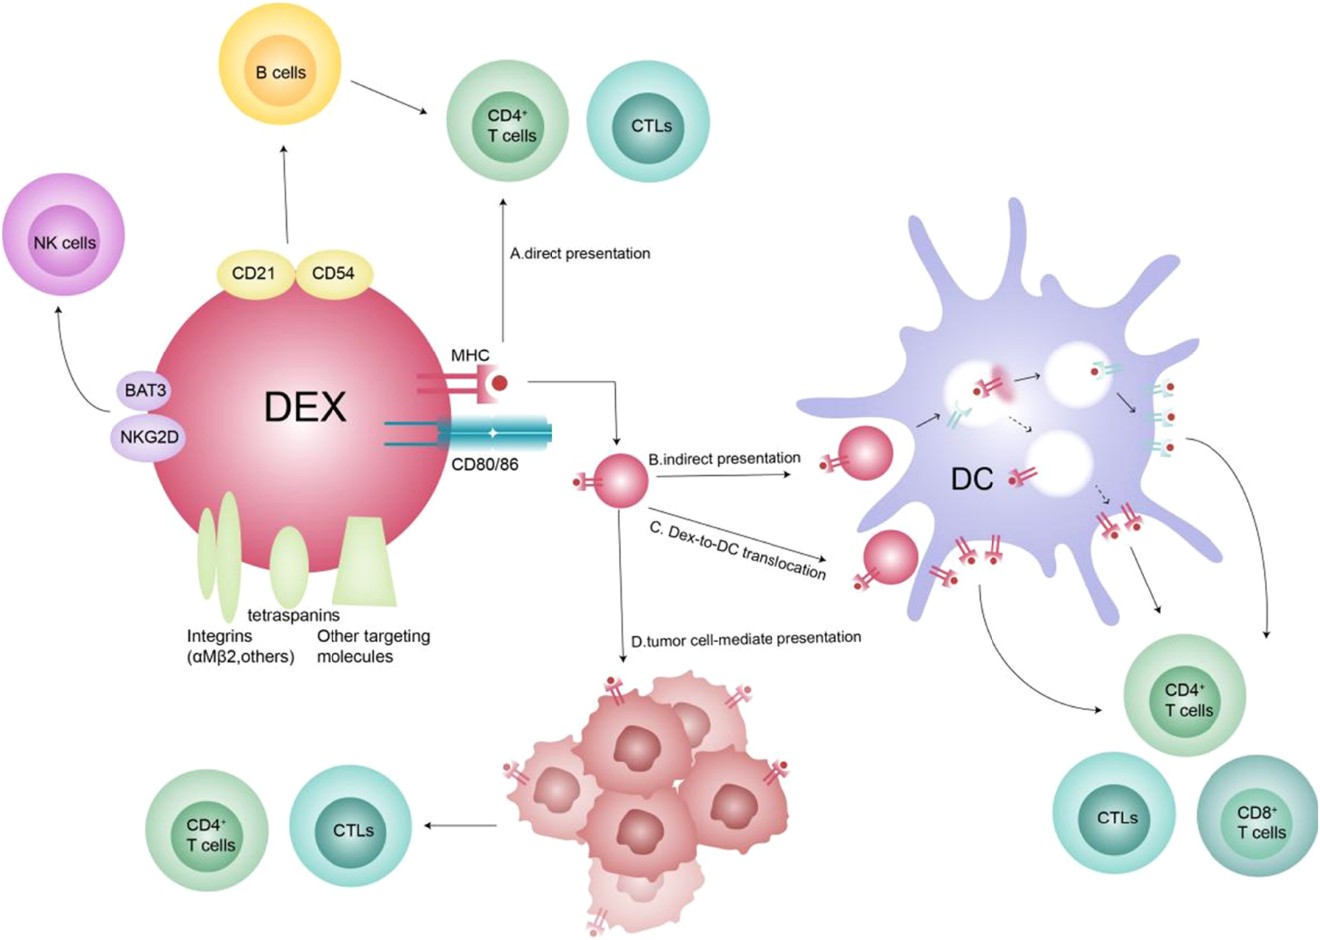 Dex interaction with immune cells.